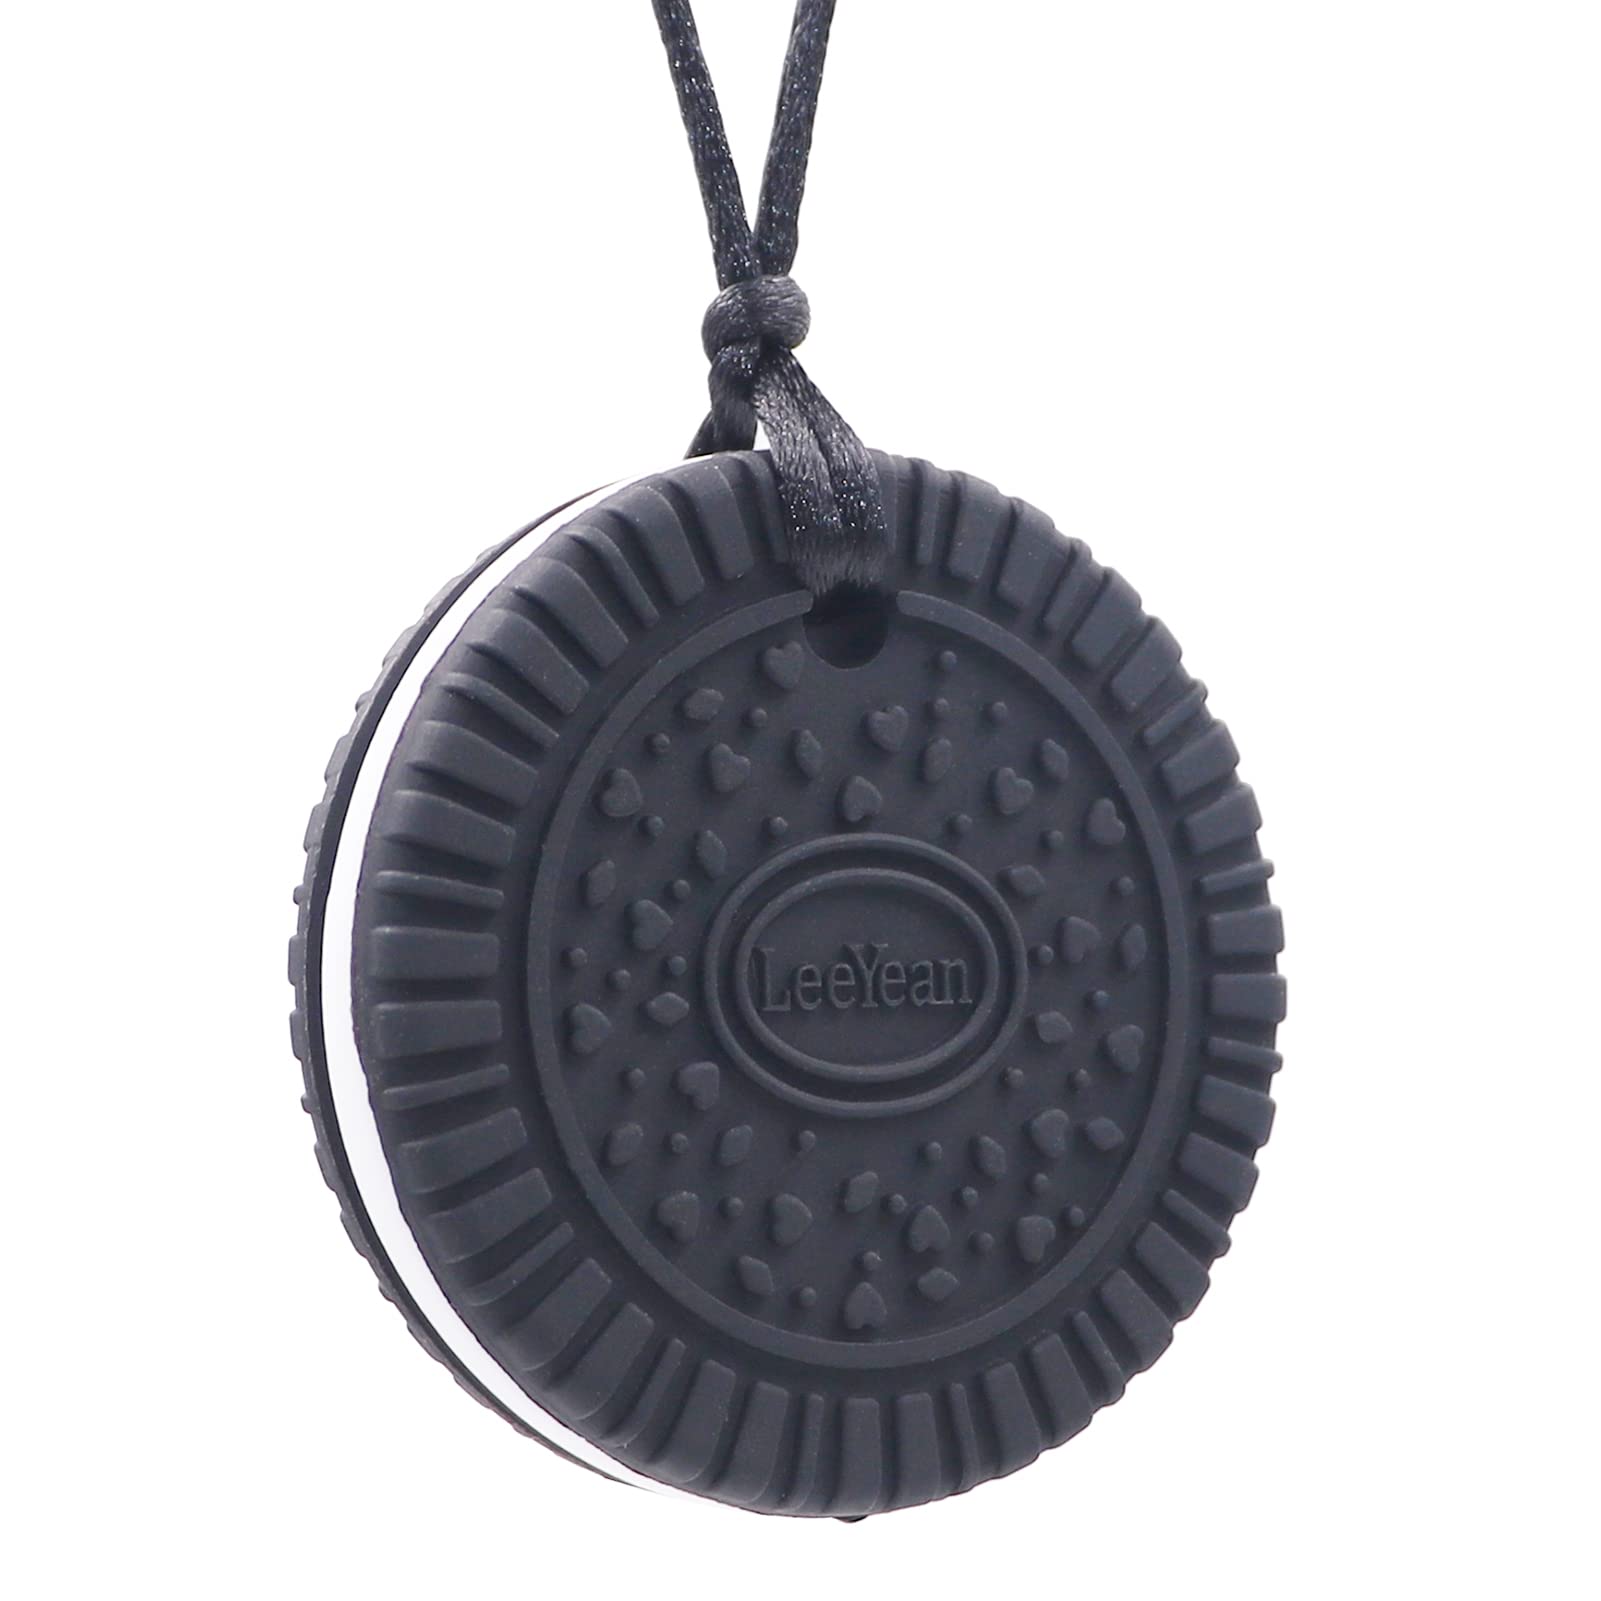 Cookie Biscuit Chew Foolery Necklace Stimming Stim Tool ADHD Anxiety ASD  Autism Relief Chewlery Adult Chew Necklace